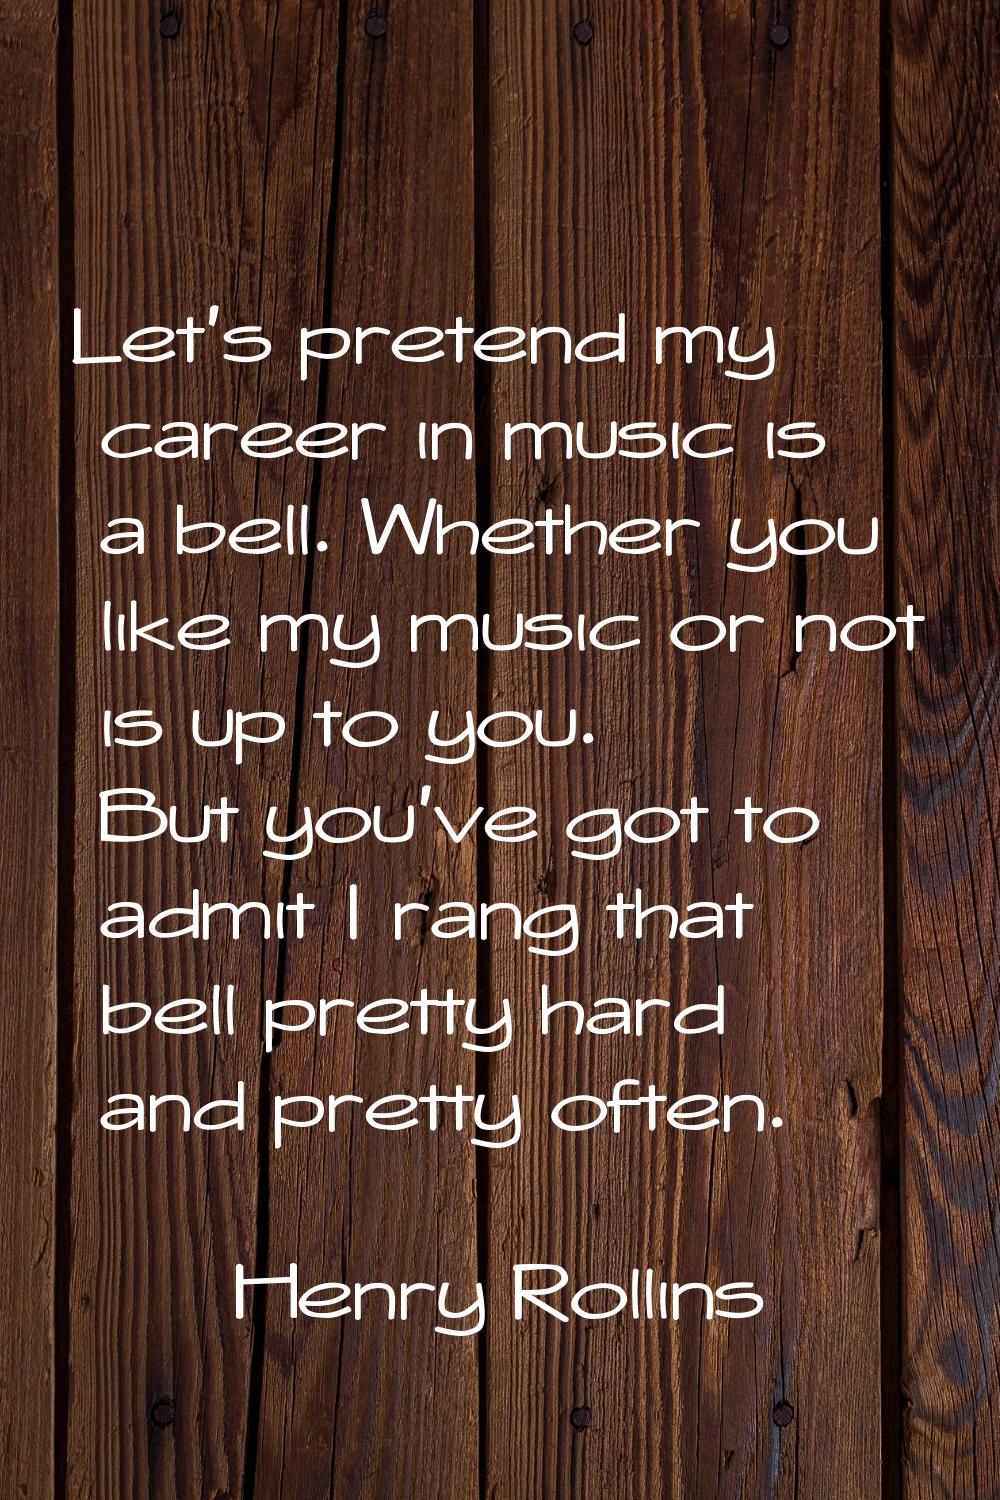 Let's pretend my career in music is a bell. Whether you like my music or not is up to you. But you'